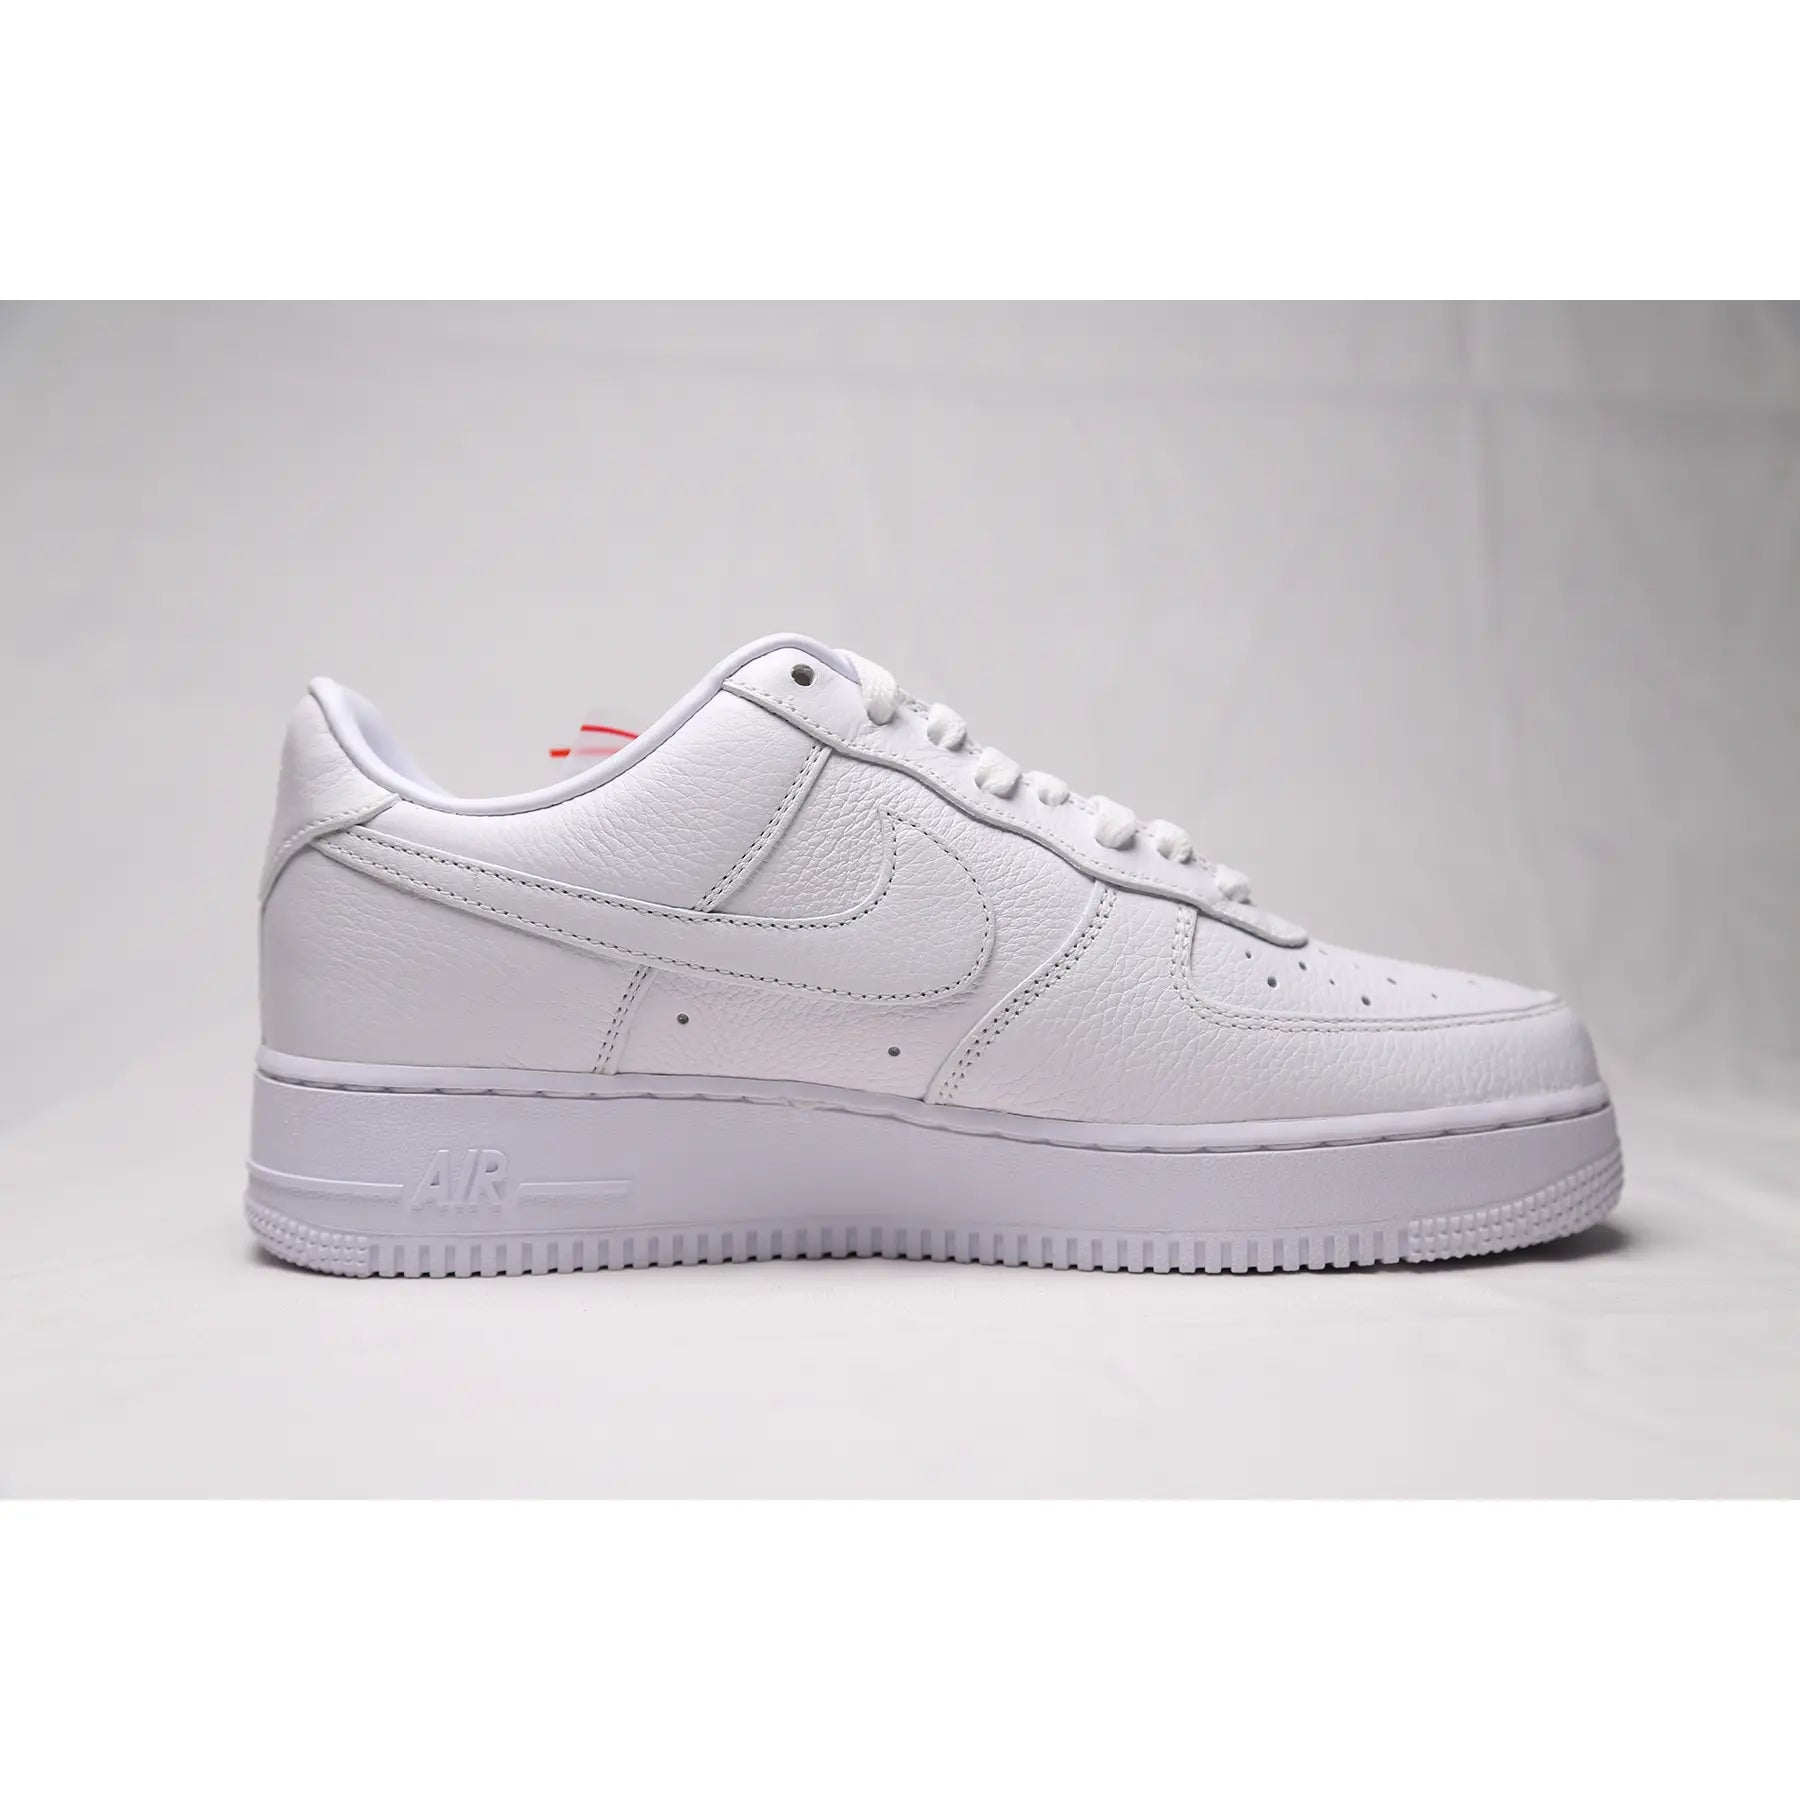 Nike Air Force 1 Low NOCTA Certified Lover Boy " Love you Forever"